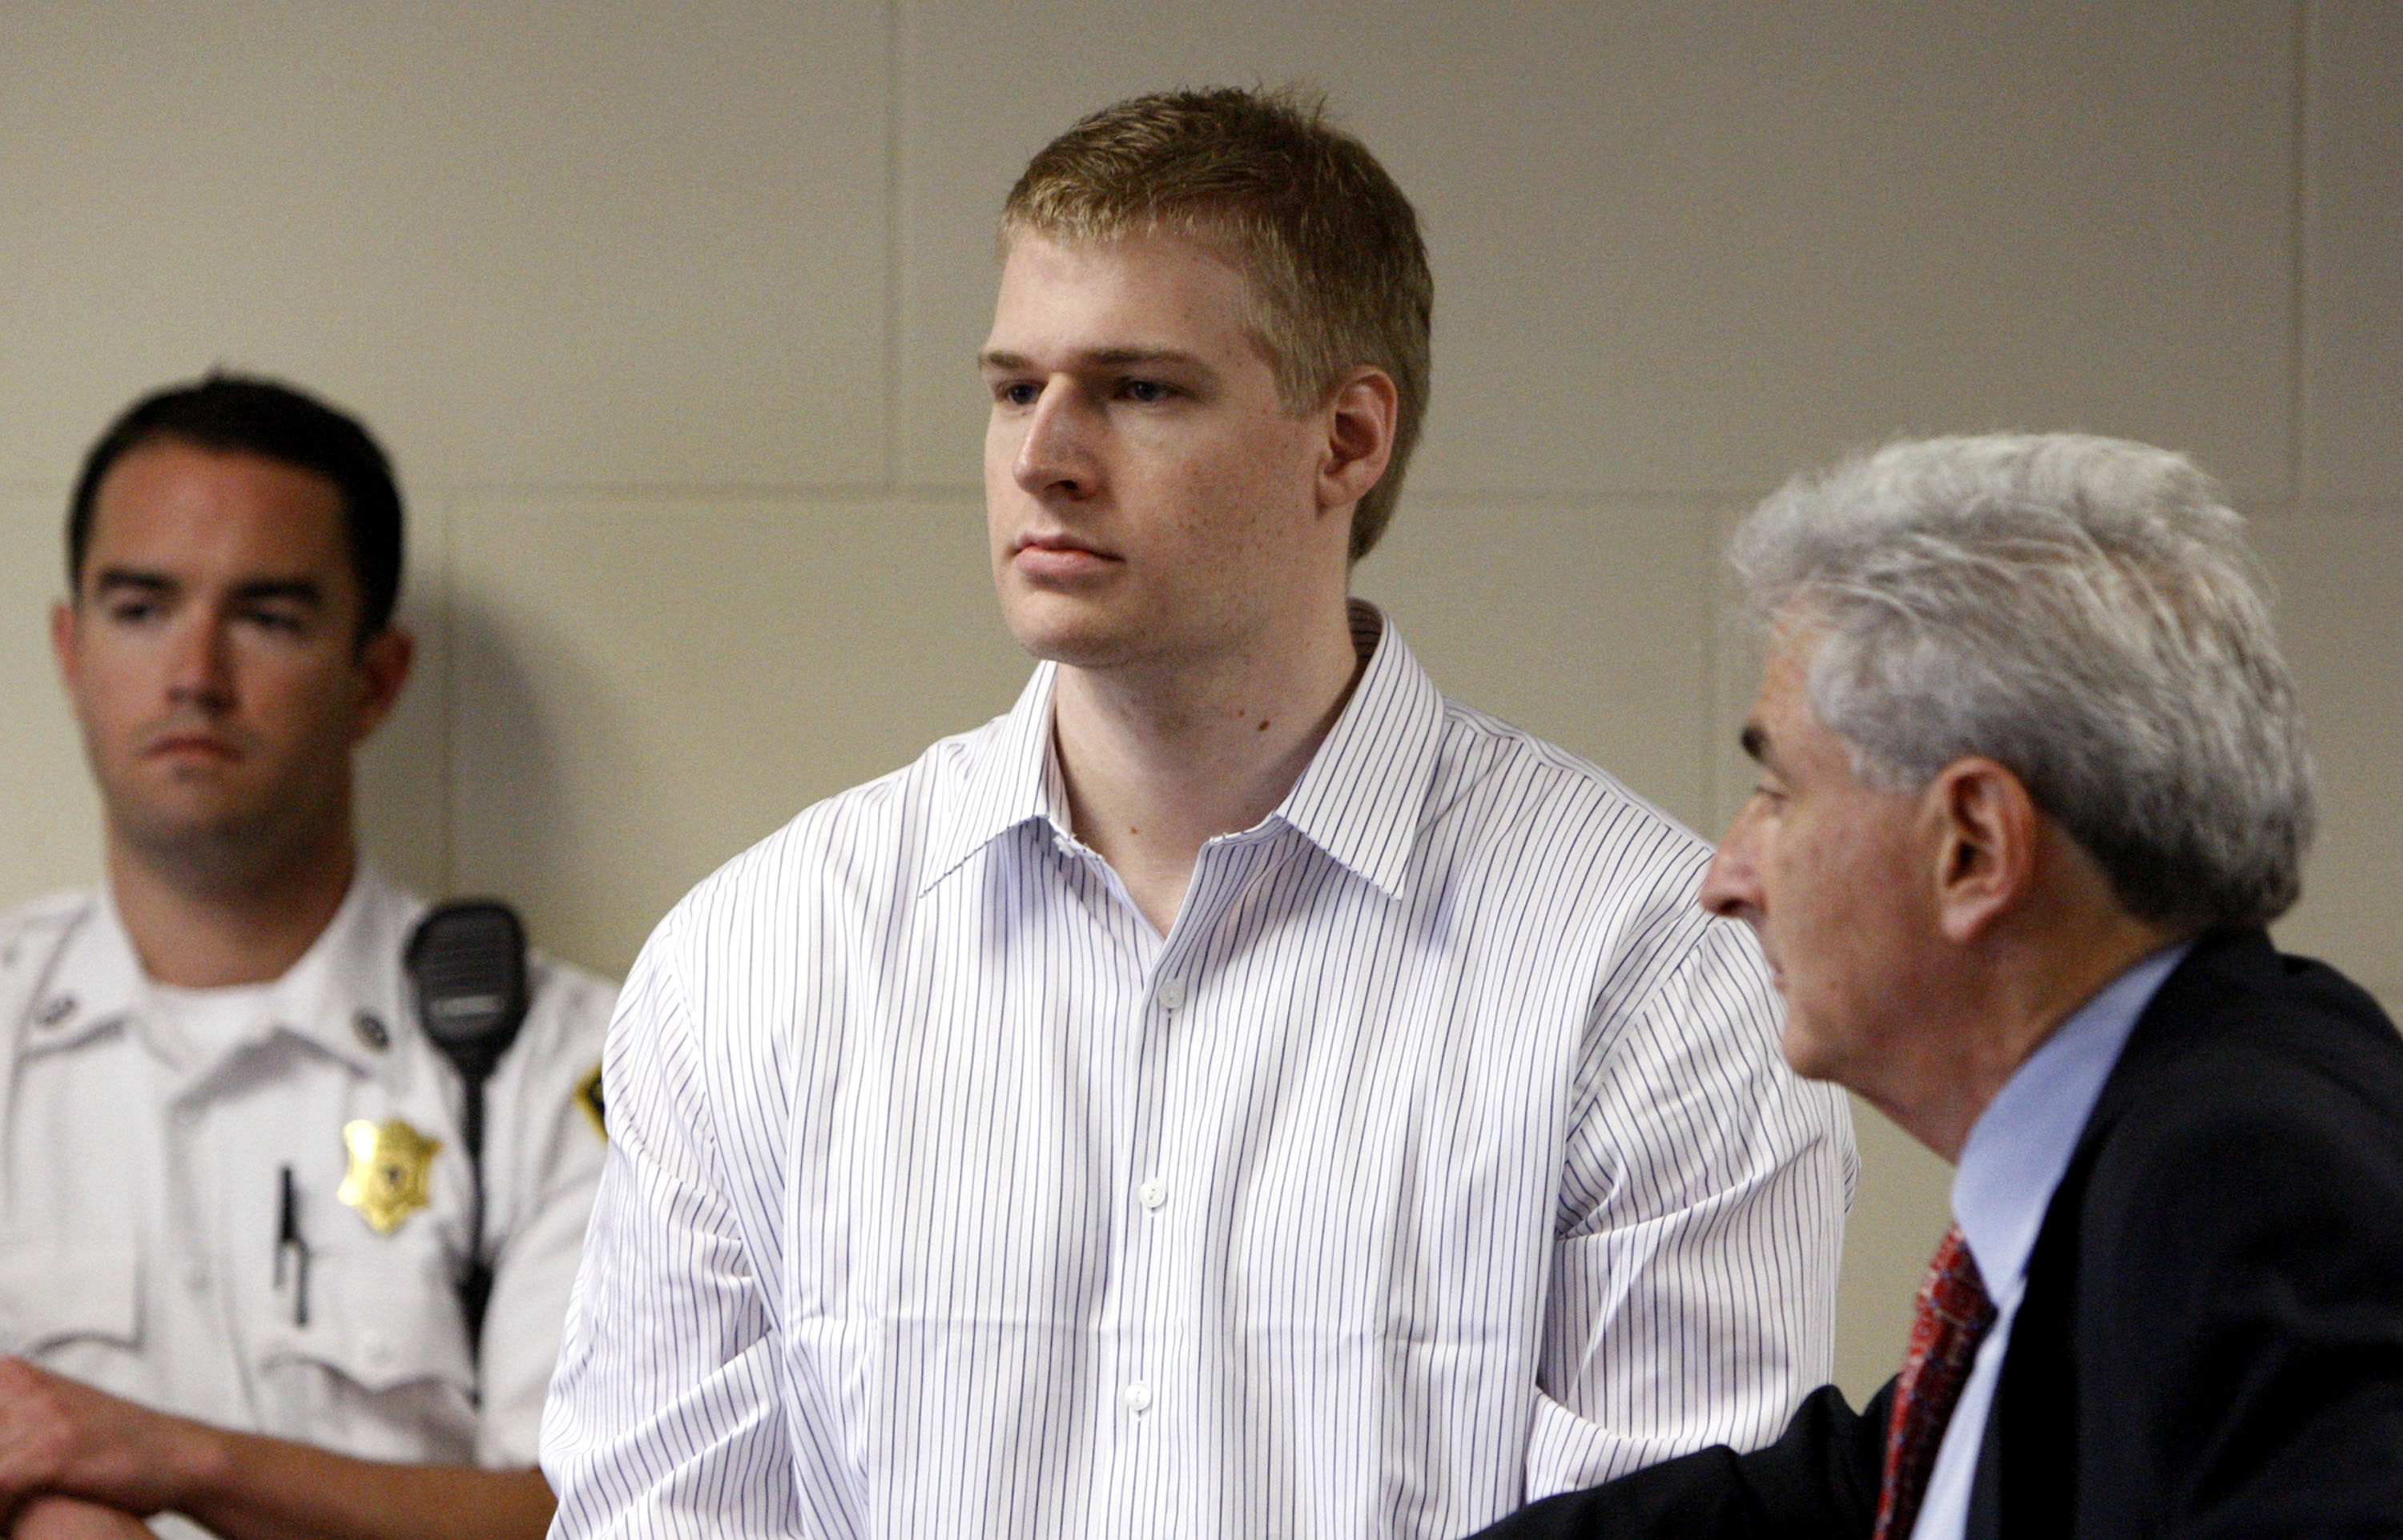 In this June 22, 2009 file photo, former Boston University medical student Philip Markoff, center, stands with his attorney John Salsberg, right, during his arraignment in Suffolk Superior Court in Boston. Officials confirmed that Markoff was found dead of apparent suicide in his jail cell Sunday, Aug. 15, 2010, in Boston. (Pool photo by Bizuayehu Tesfaye via AP)